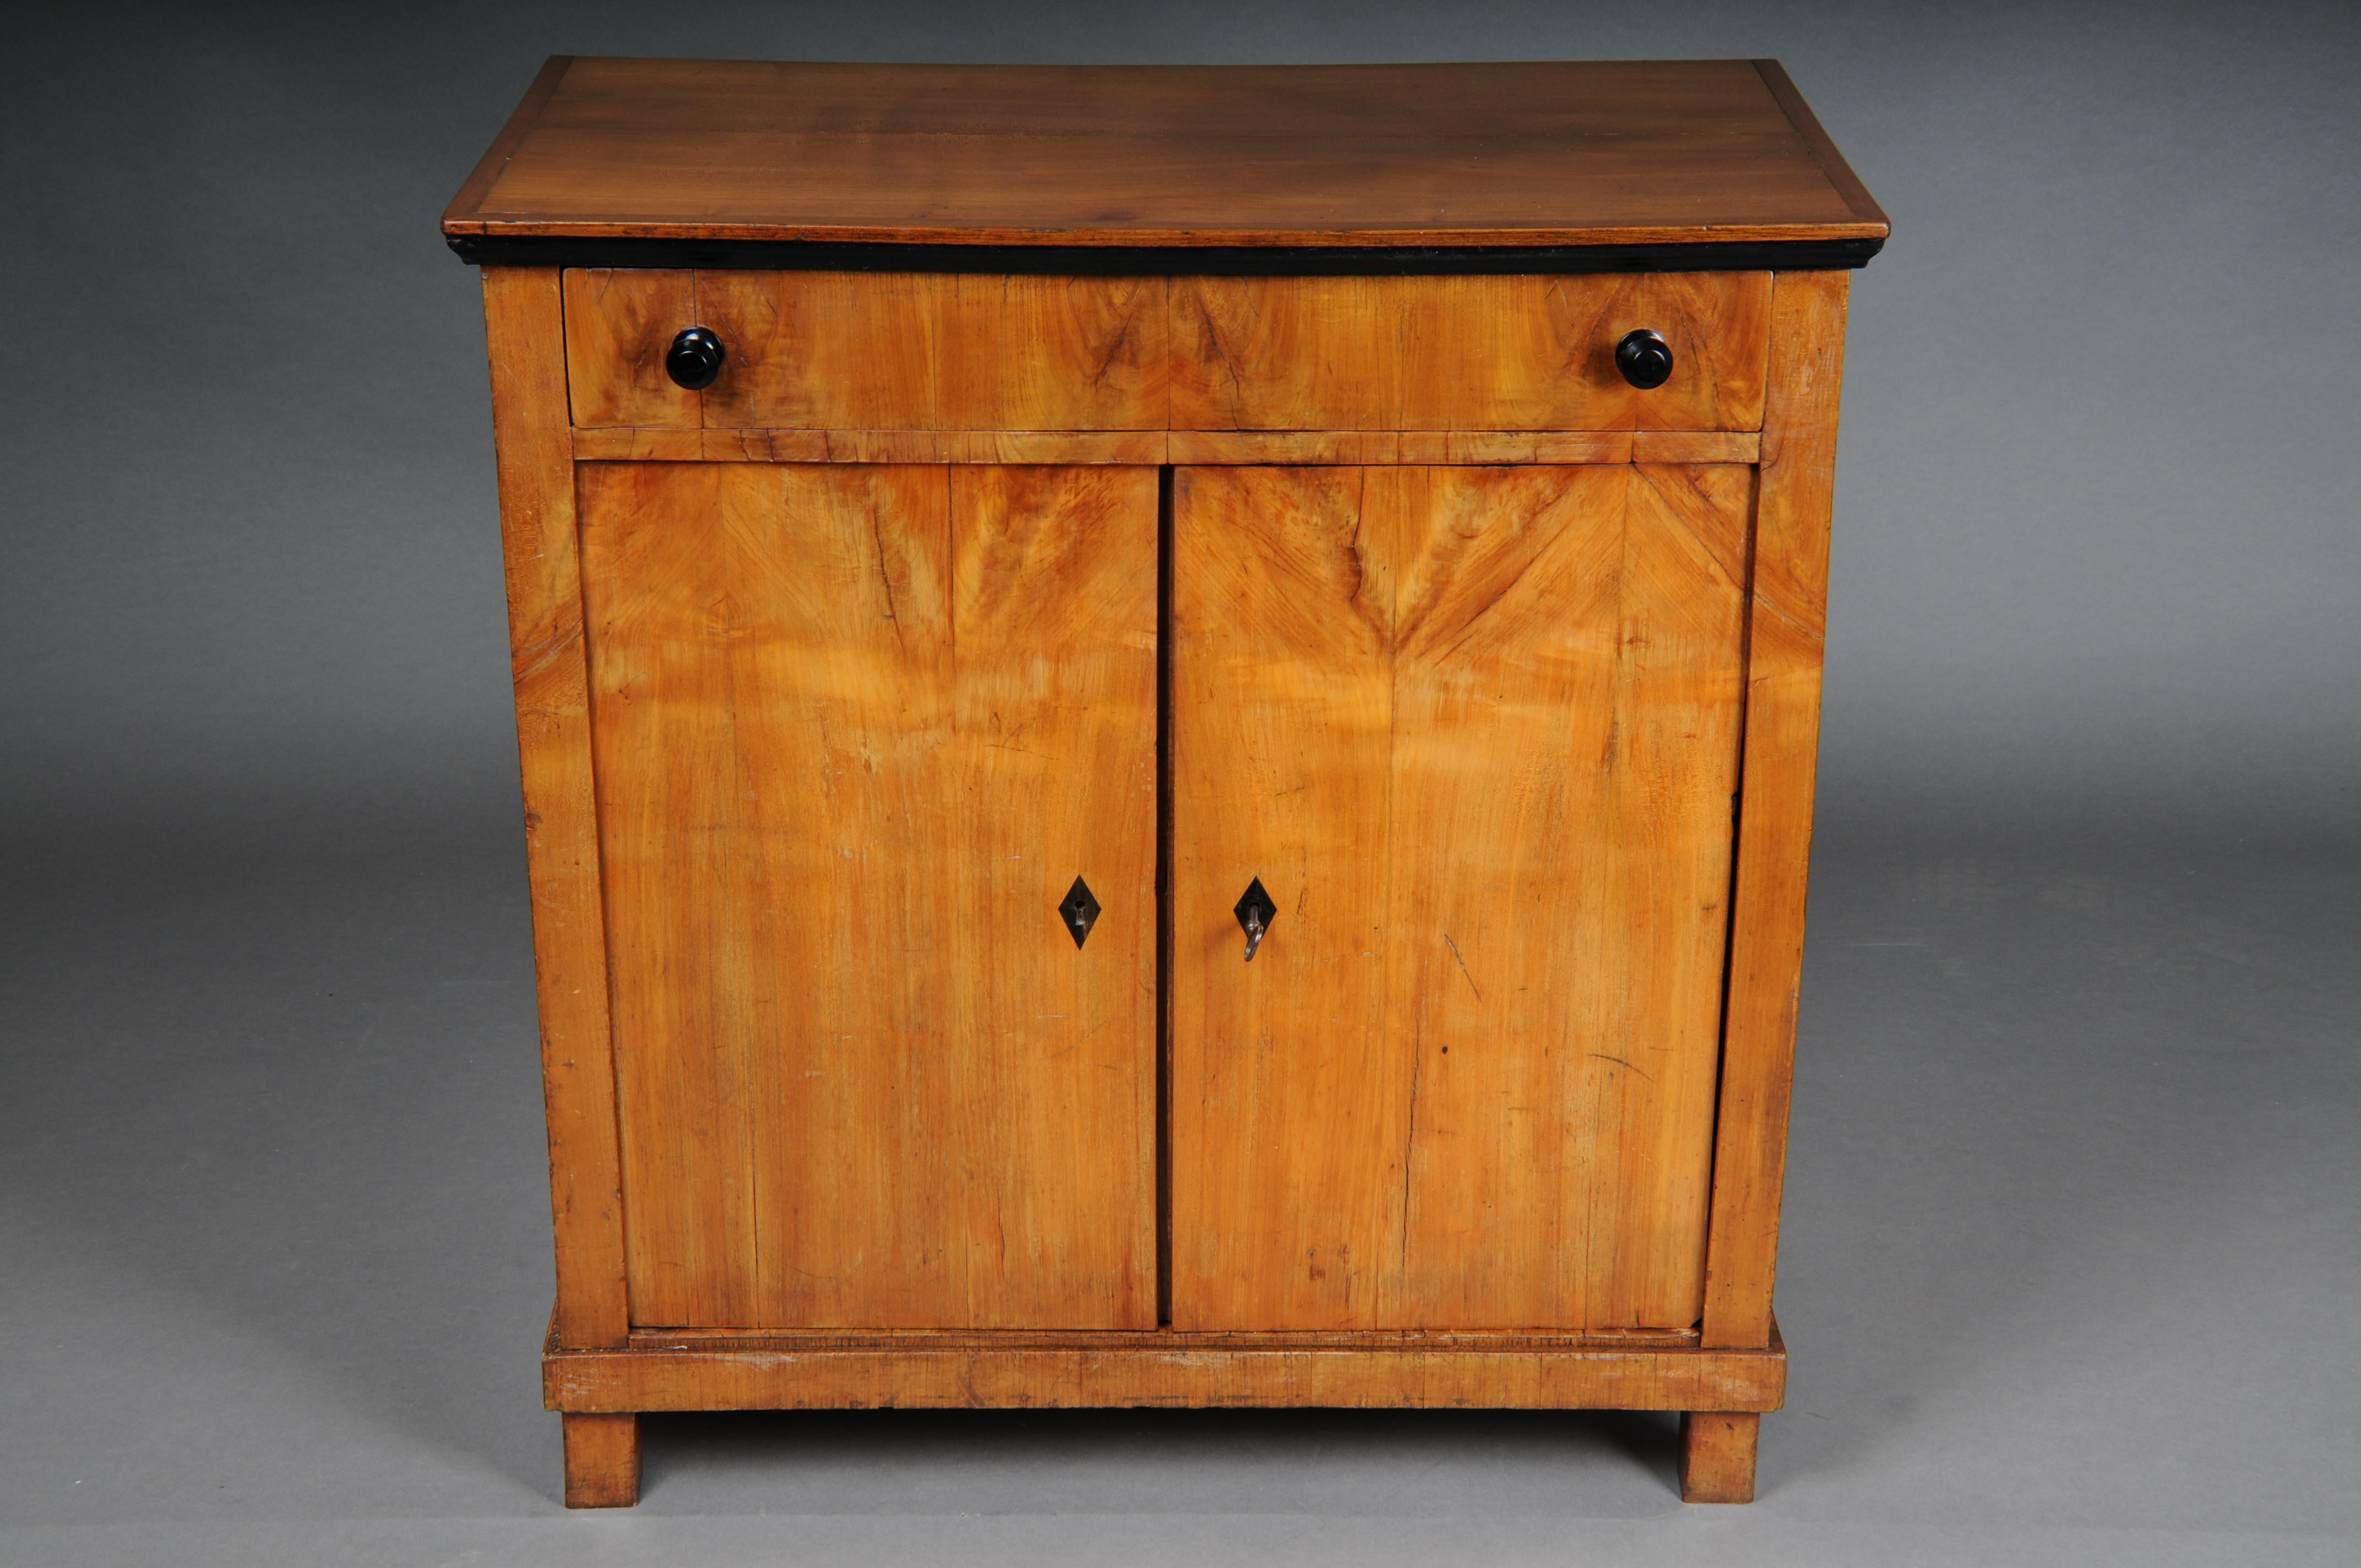 Beautiful compact Biedermeier chest of drawers, South German around 1840, birch


Solid birch body, partly ebonized. Drawer front with ebonized knobs. Lockable base cabinet with shelf. Lock and key available.

Biedermeier, South German around 1840